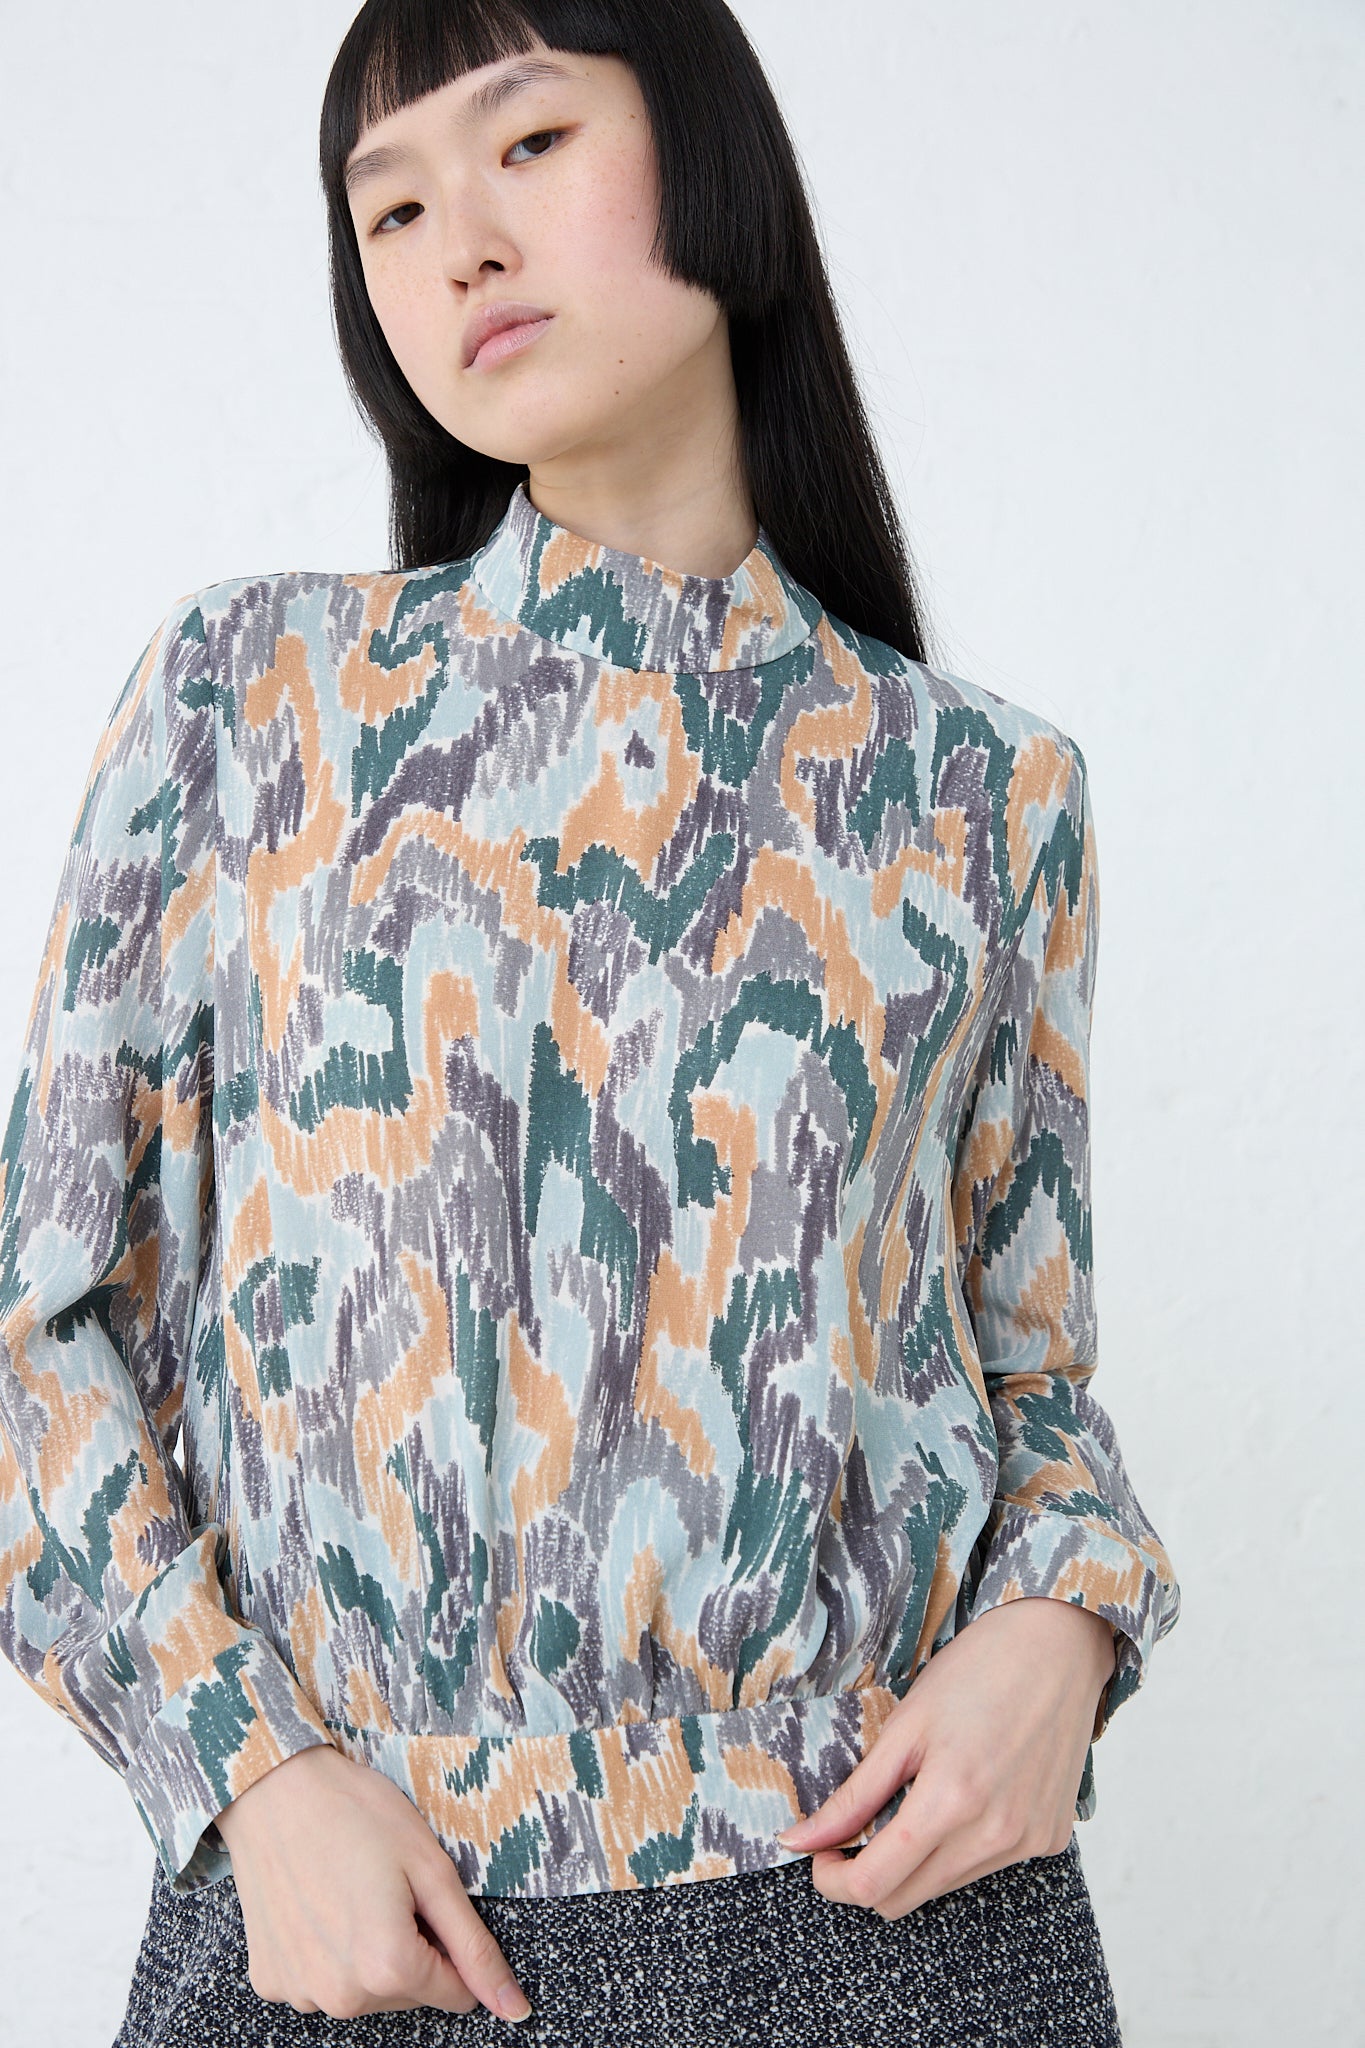 A model wearing the Mina Perhonen Light Dance Blouse in Gray Mix and camouflage print.